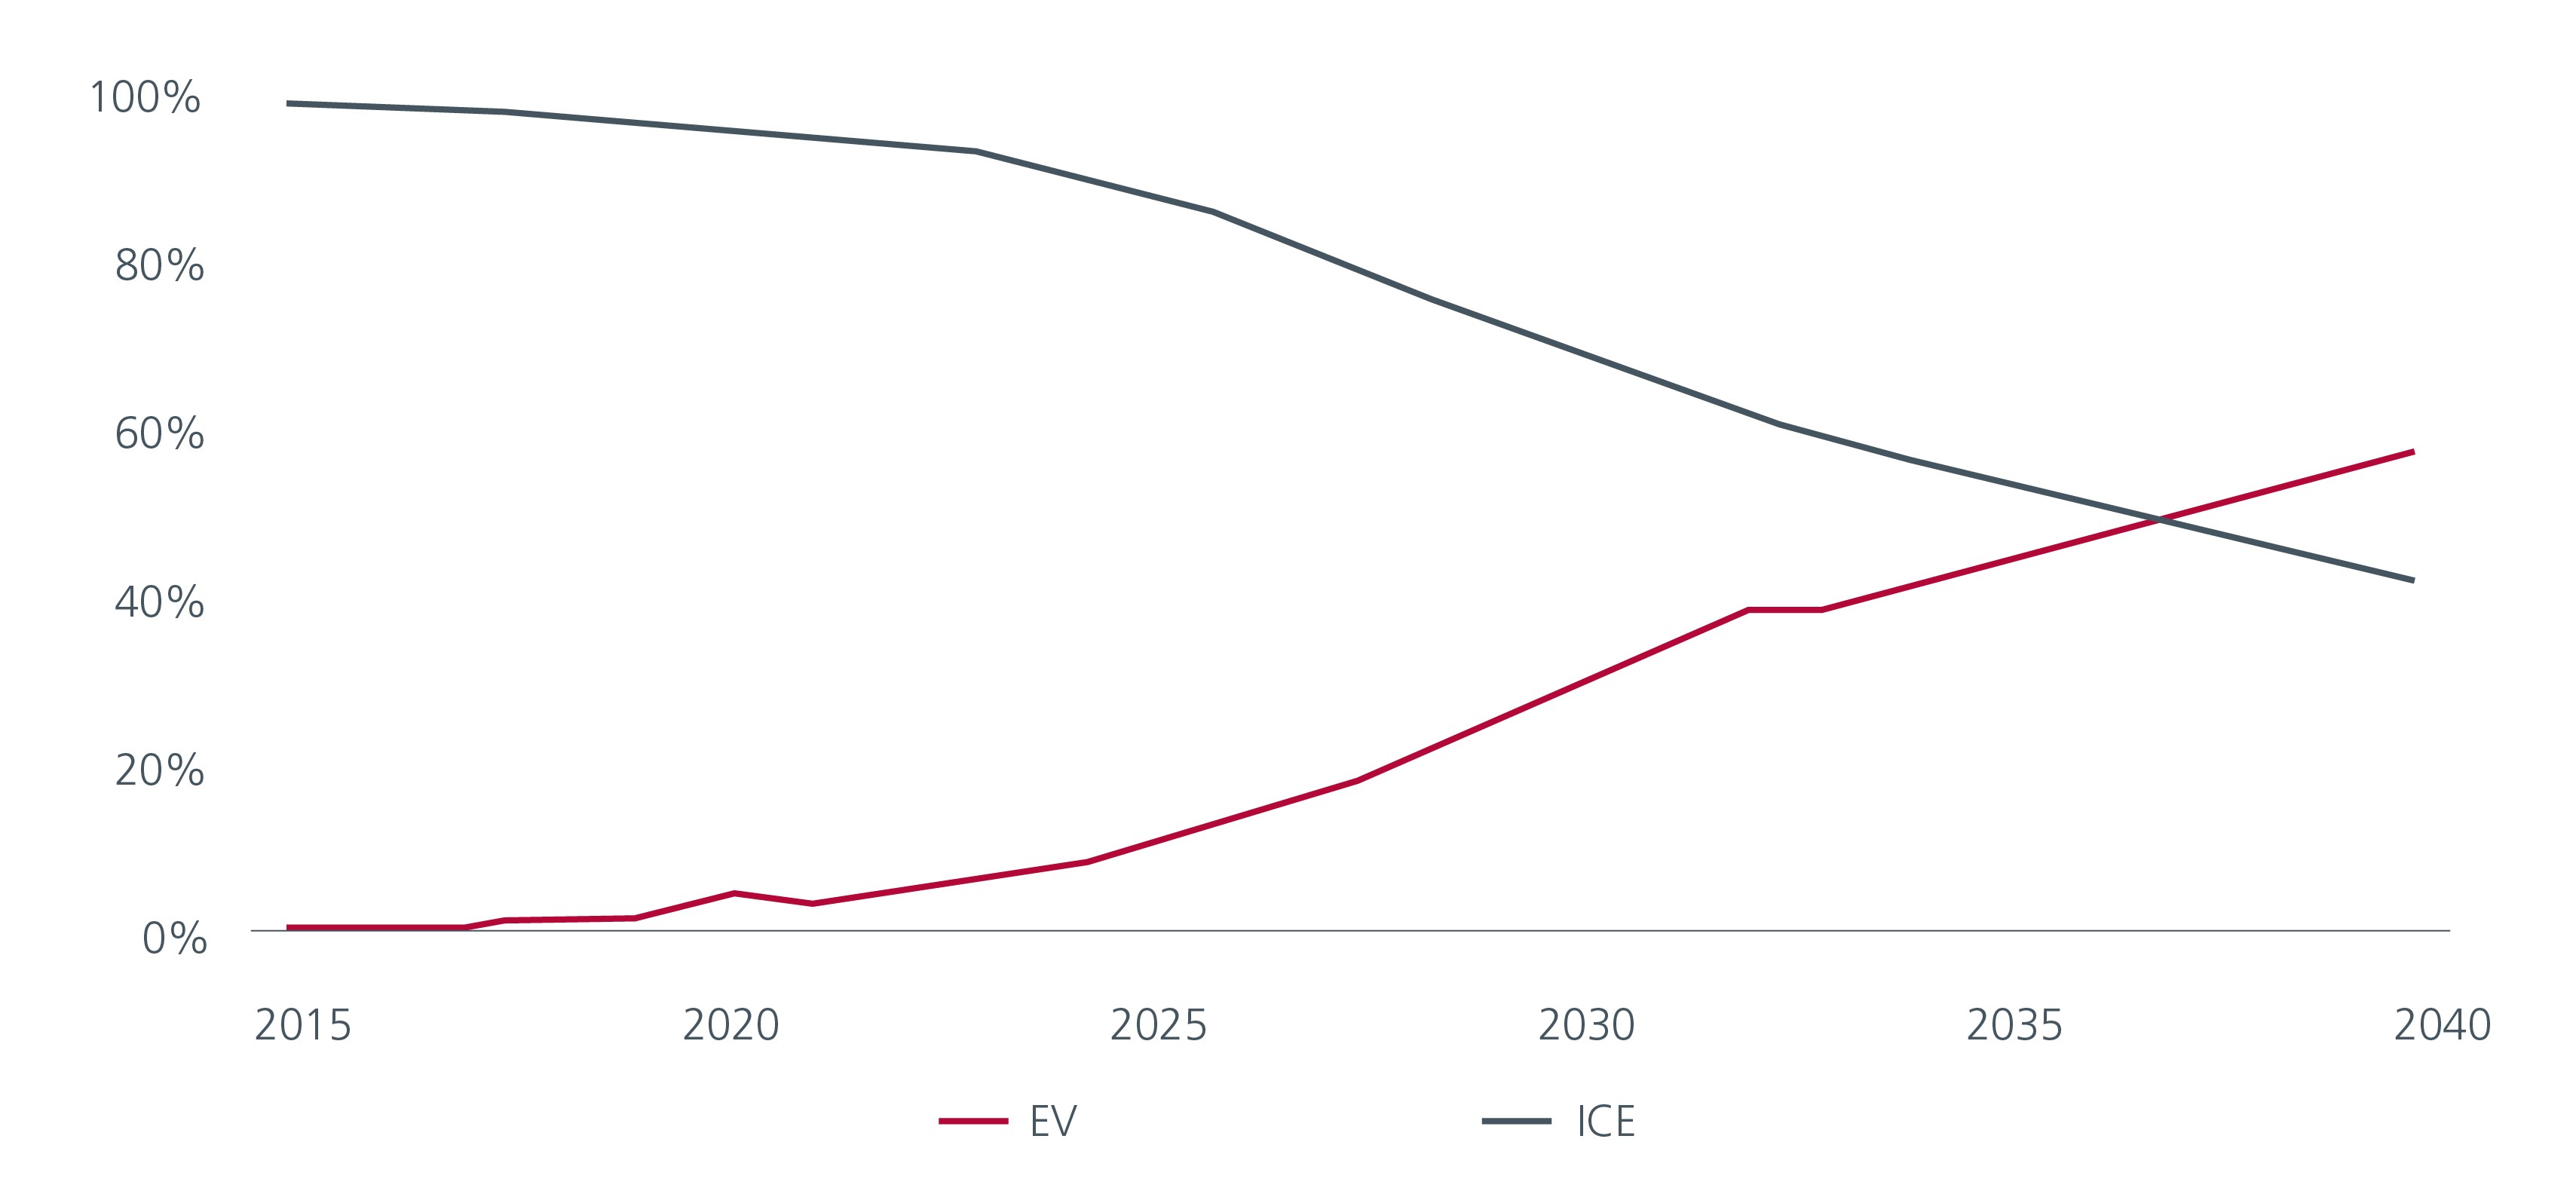 Fig. 2. Global EV and ICE shares of passenger vehicle sales